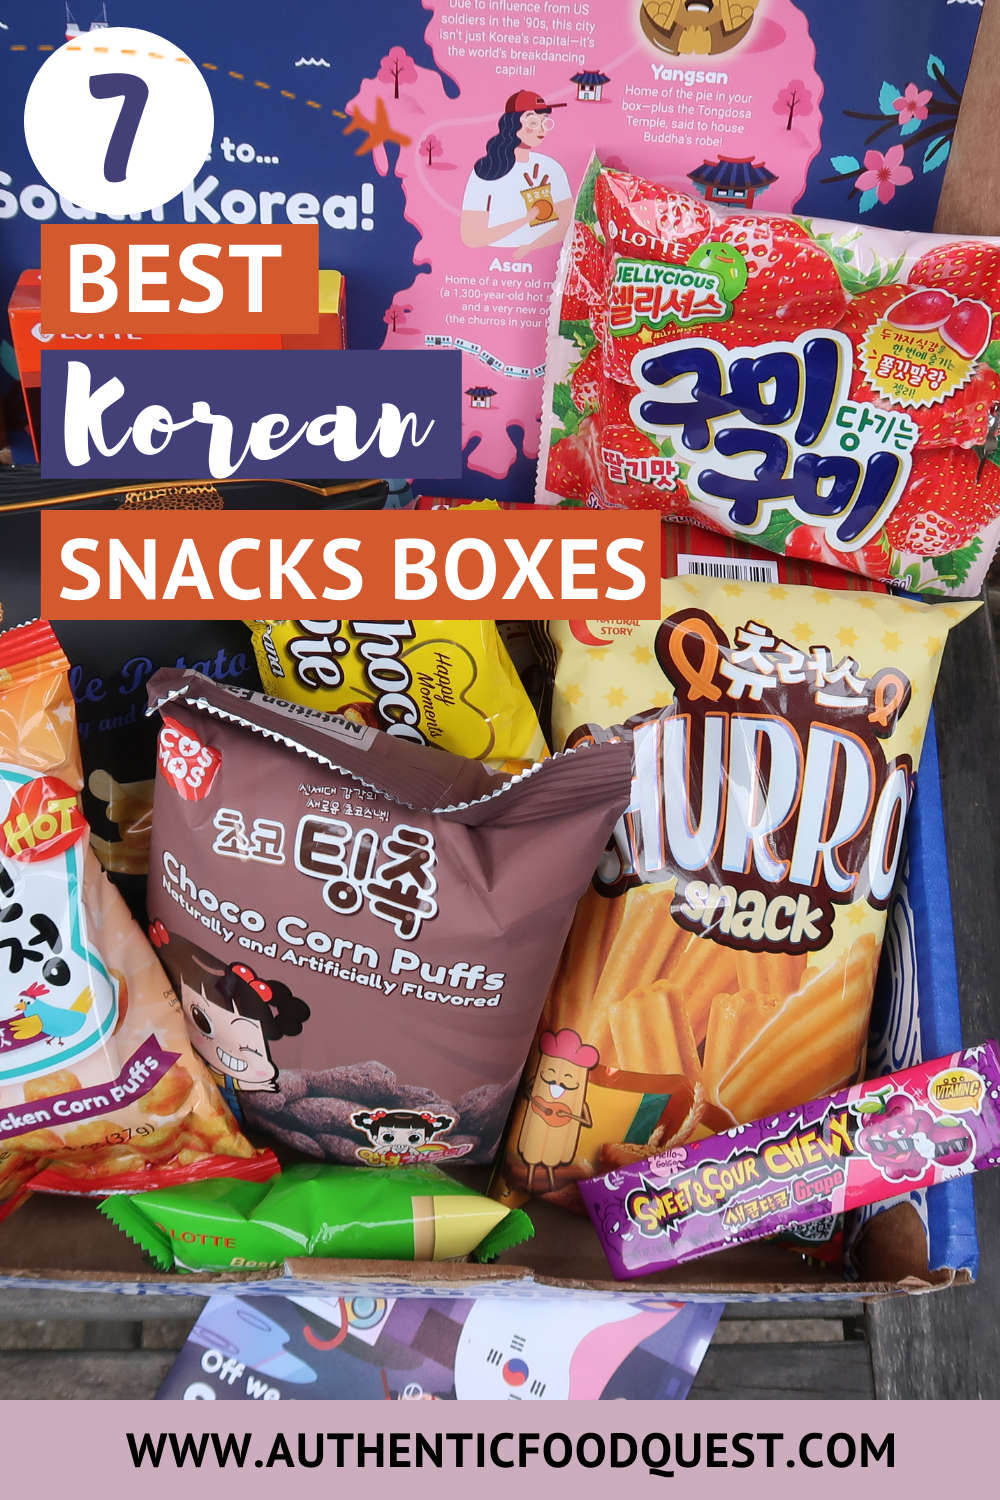 Top 7 Korean Snacks Box To Try - A Comprehensive Review 2022